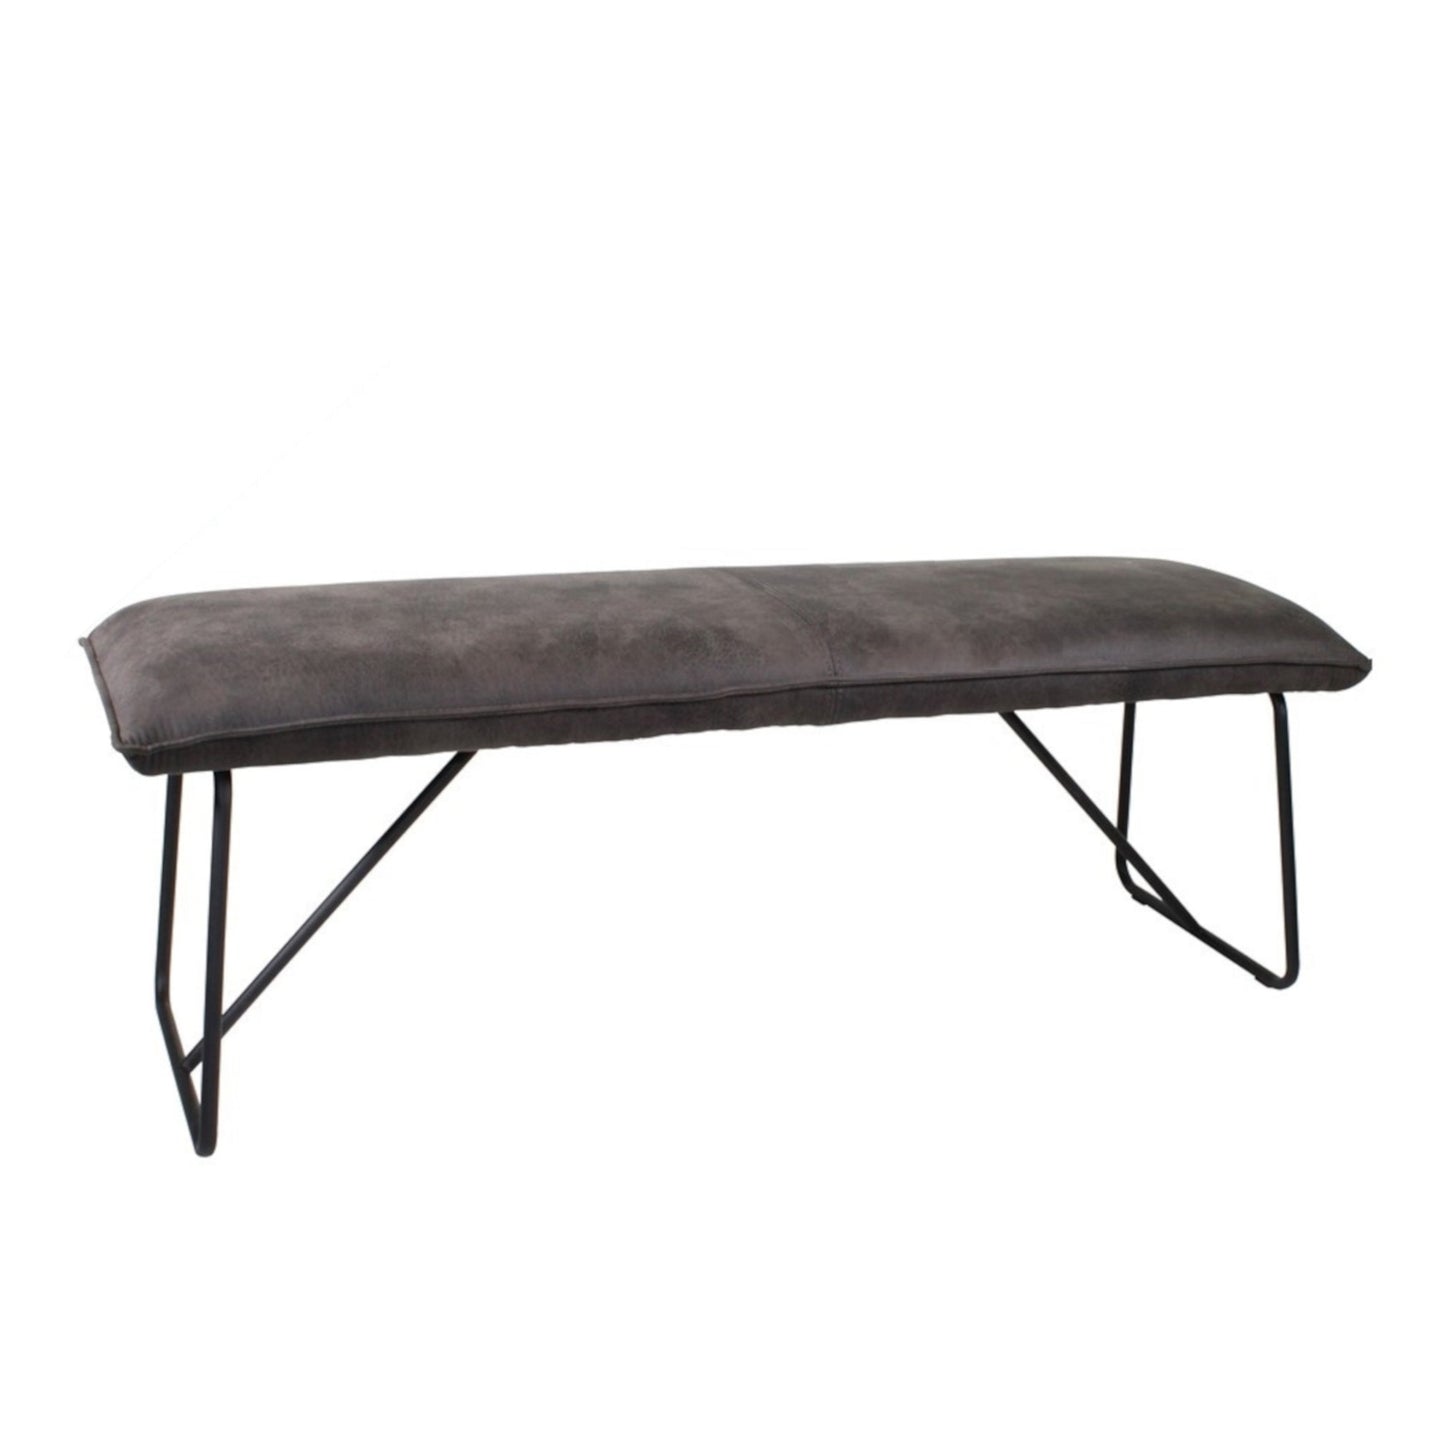 Grayson Dining Bench - Large